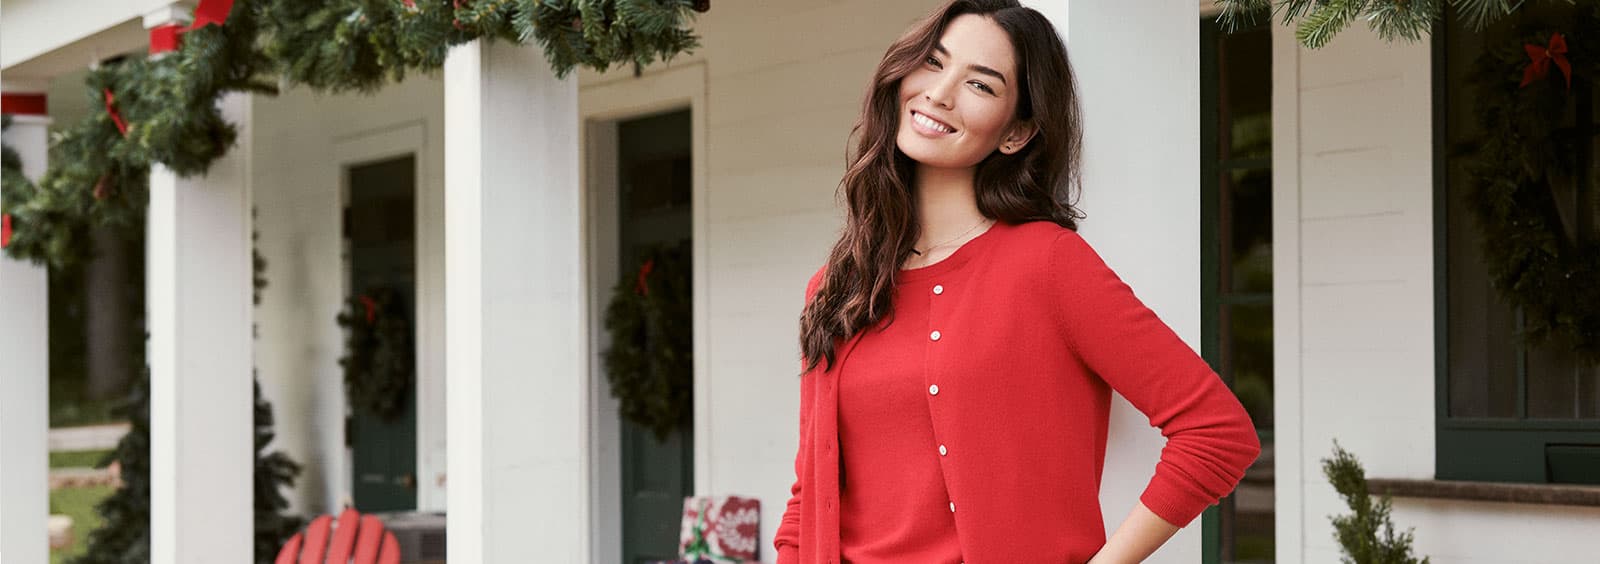 Best Women’s Cotton Sweaters for Every Season | Lands' End